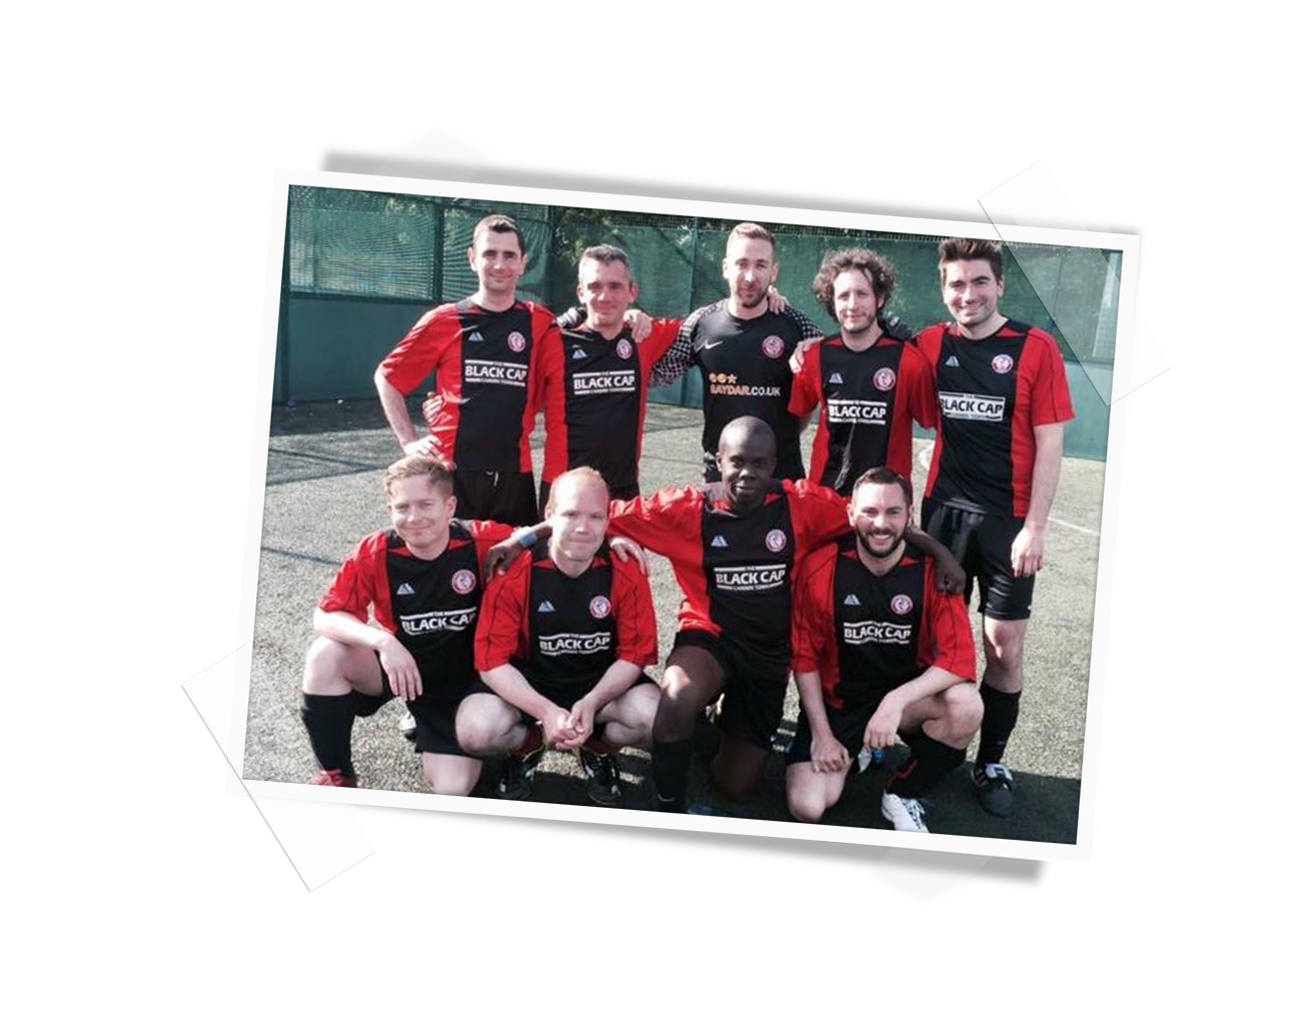 The Leftfooters Football team founded at the Black Cap in 1999, here wearing their Cap-sponsored kit